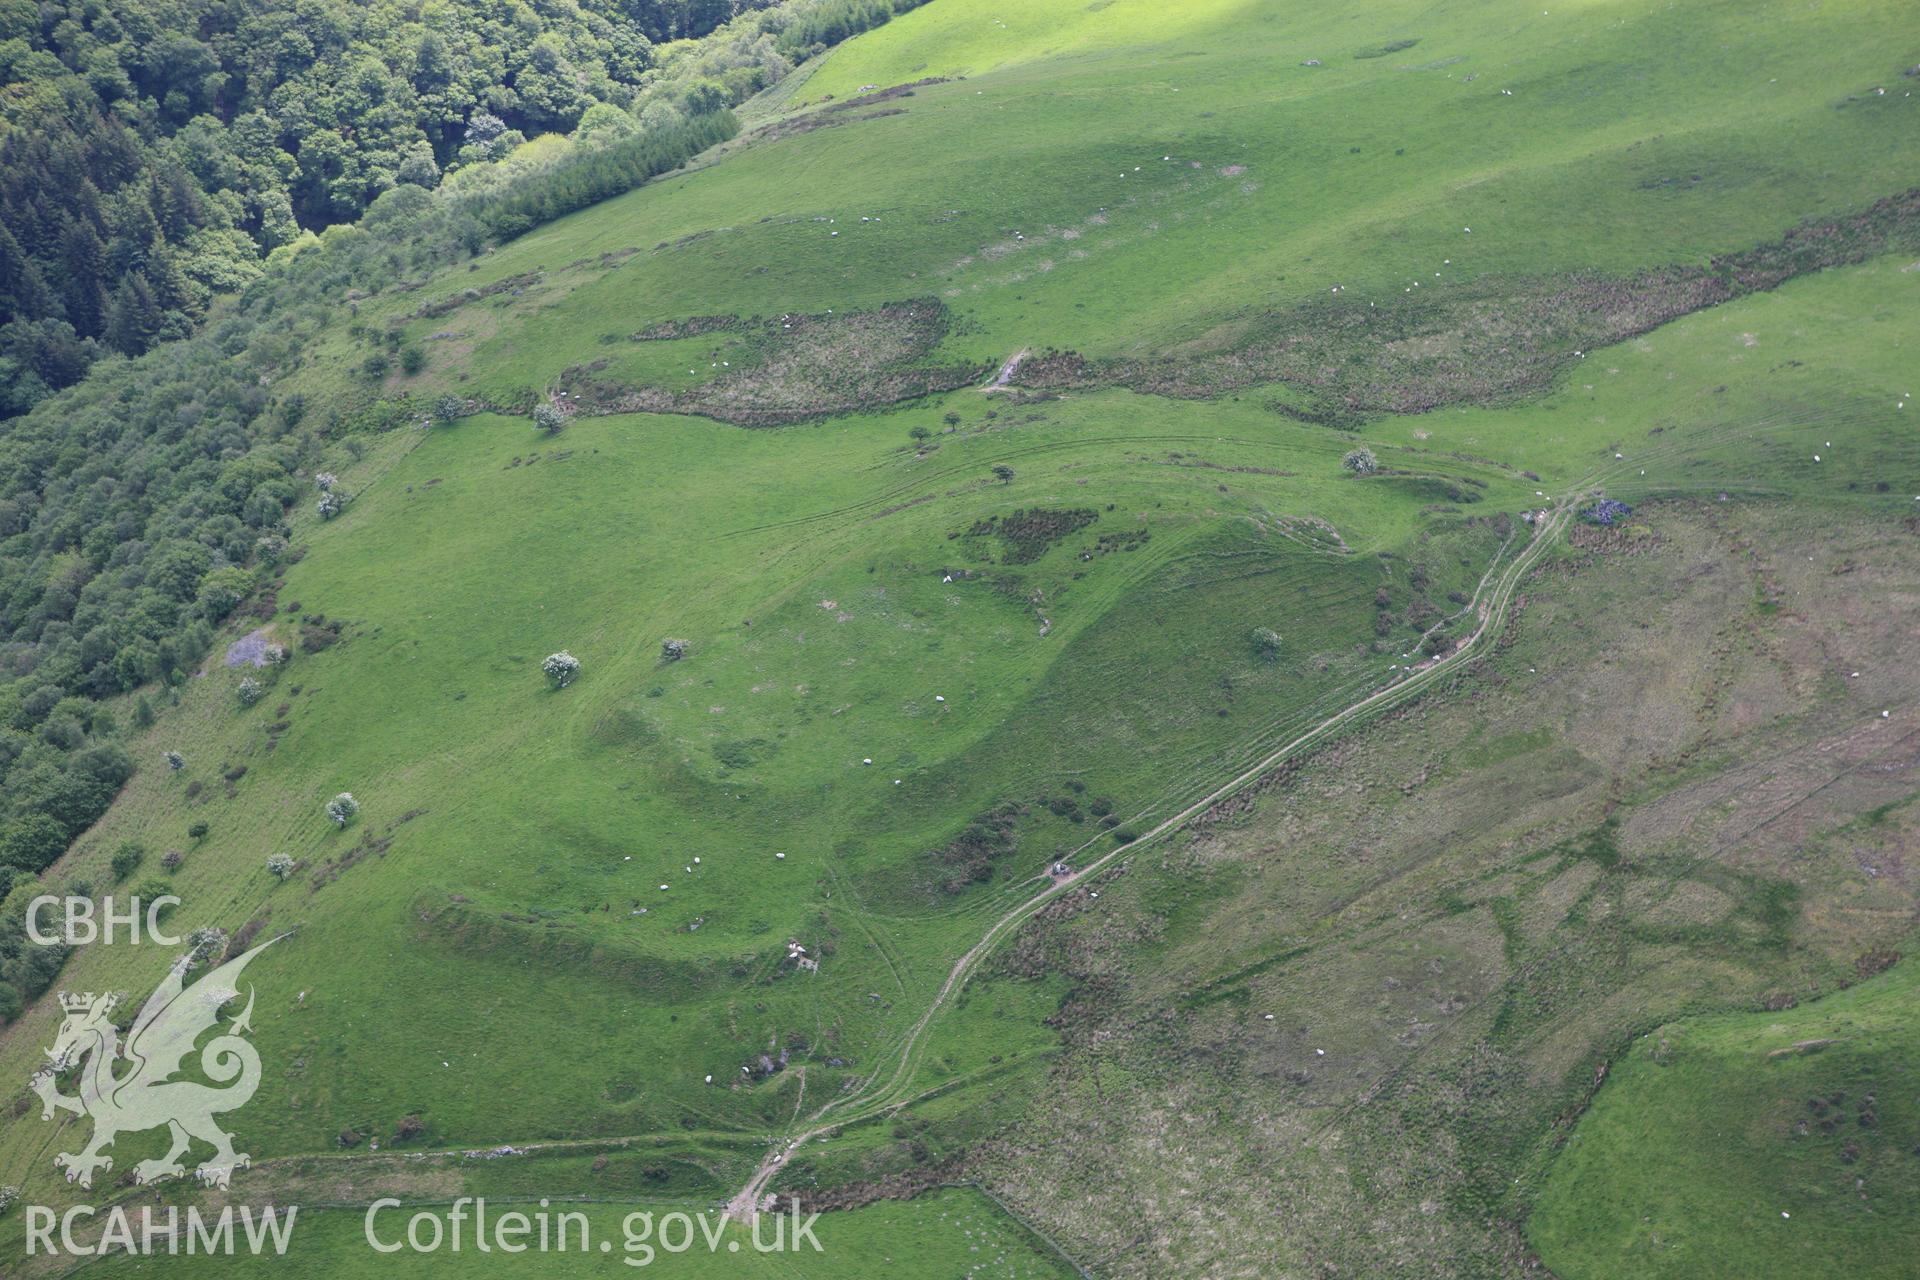 RCAHMW colour oblique aerial photograph of Pen Dinas. Taken on 02 June 2009 by Toby Driver